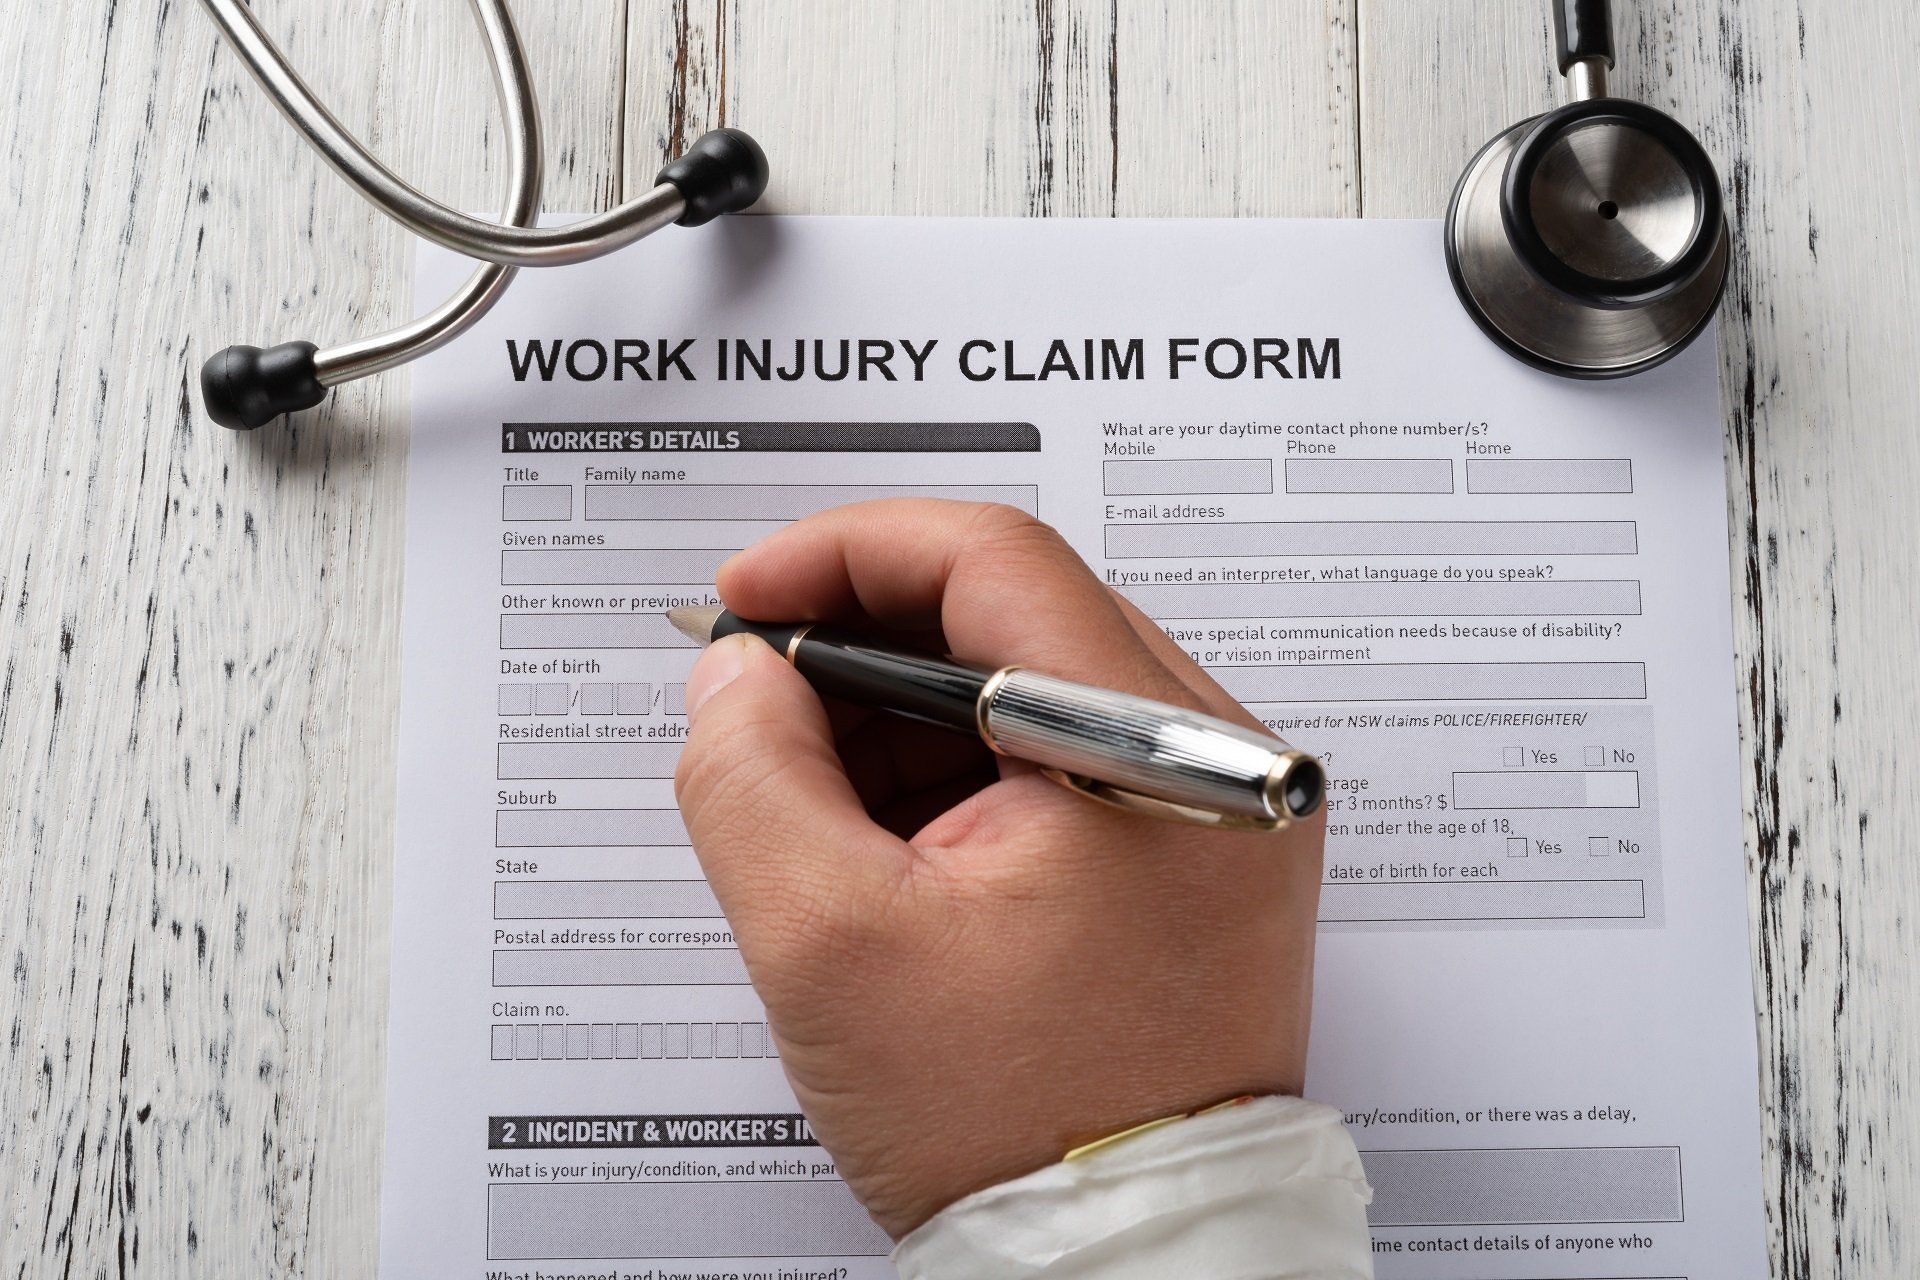 Workers’ Compensation 101